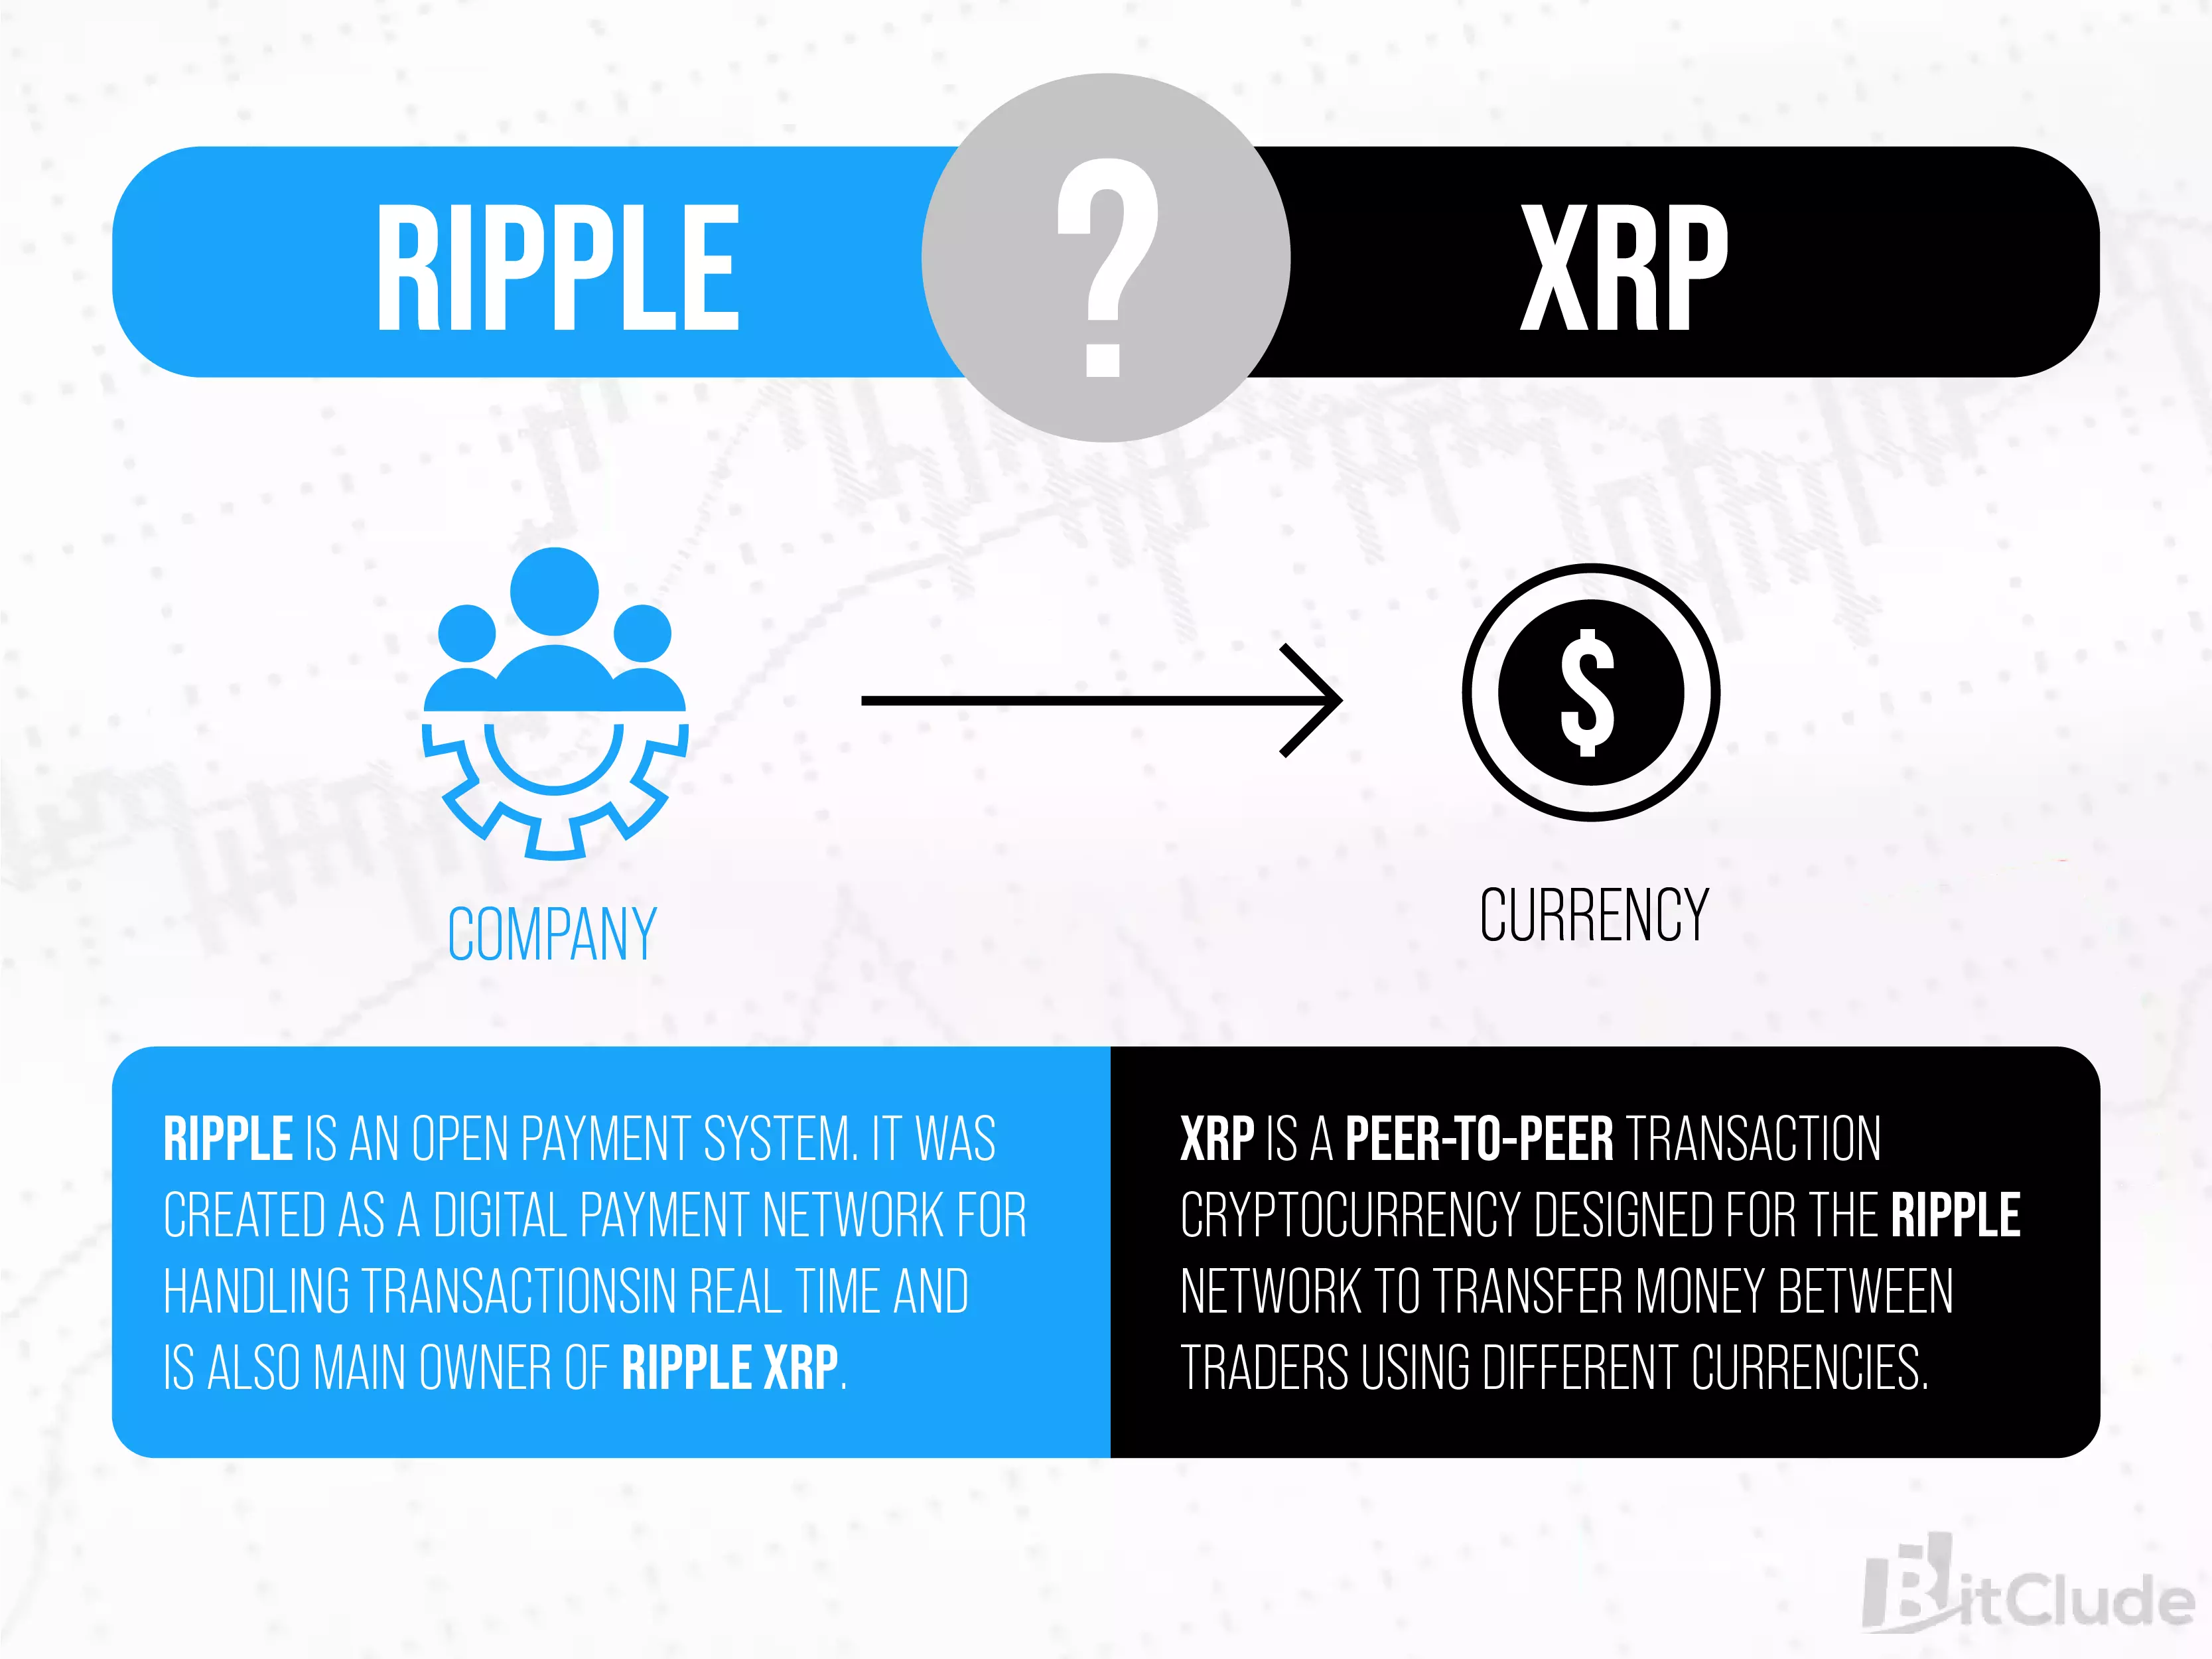 Ripple is not a cryptocurrency - Ripple is a company and XRP is a cryptocurrency